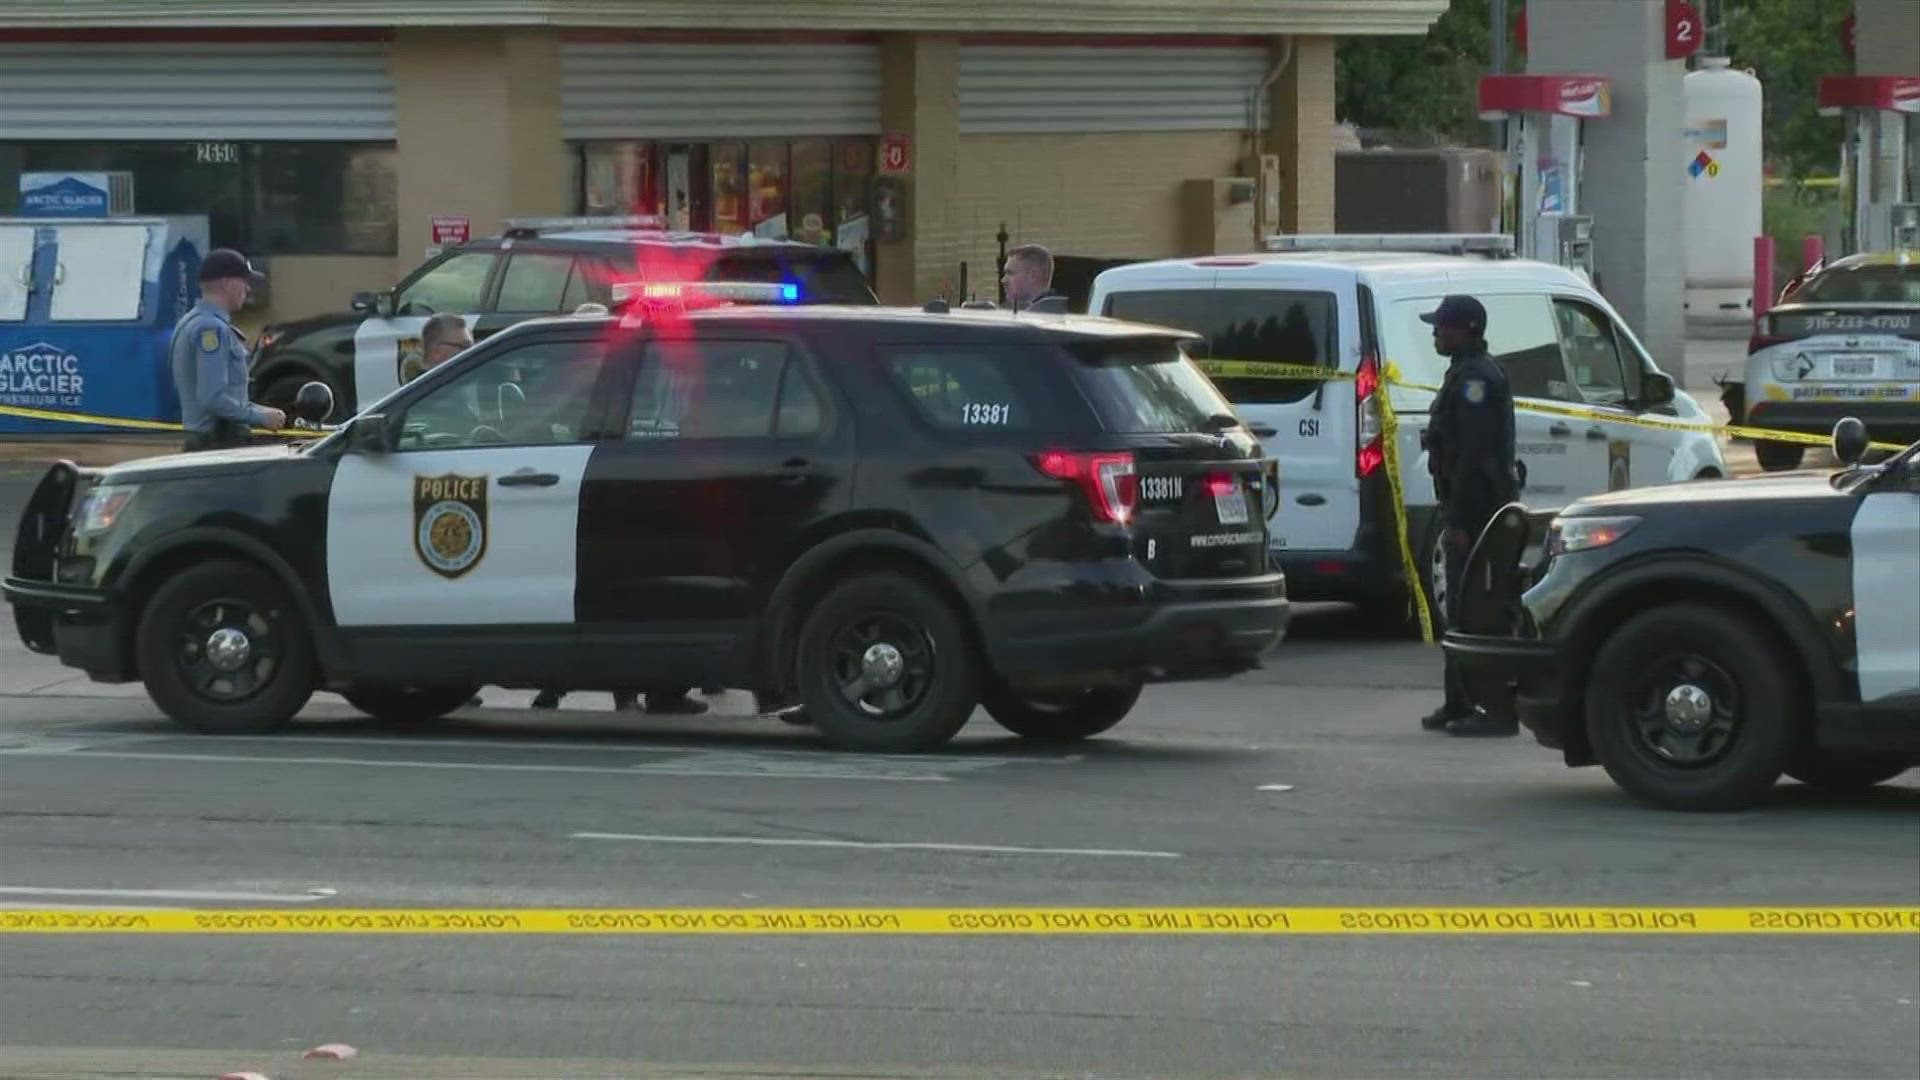 The Sacramento Police Department is investigating a deadly shooting at a gas station in Natomas.